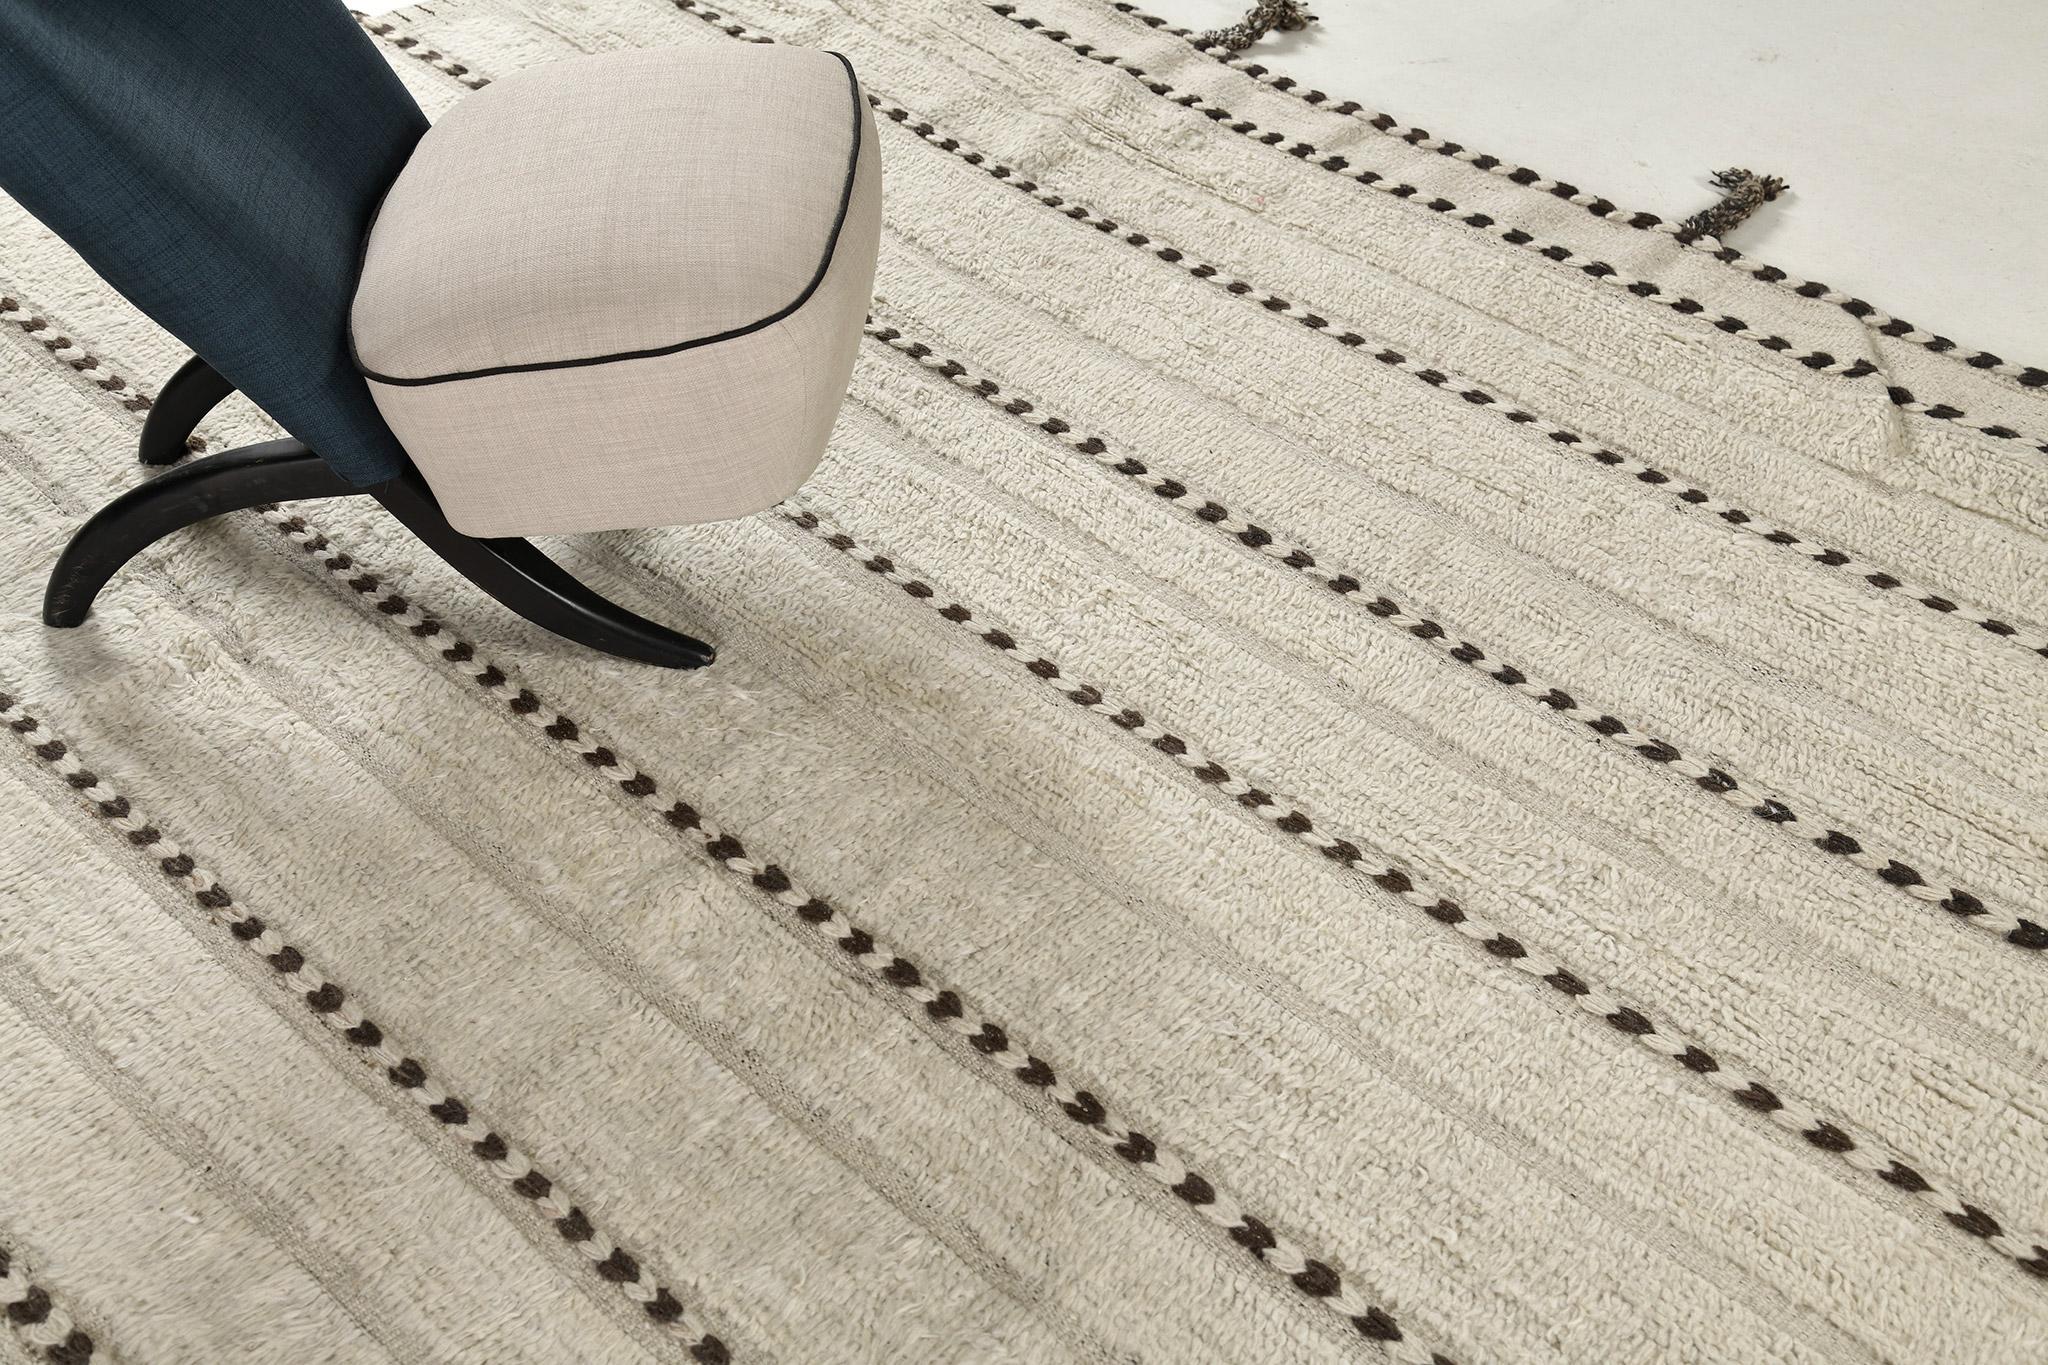 Abrolhos is a handwoven luxurious wool rug with timeless embossed detailing. In addition to its perfect ivory flatweave, Albrohos has a beautiful shag that brings a lustrous texture and contemporary feel to one's space. The Haute Bohemian collection